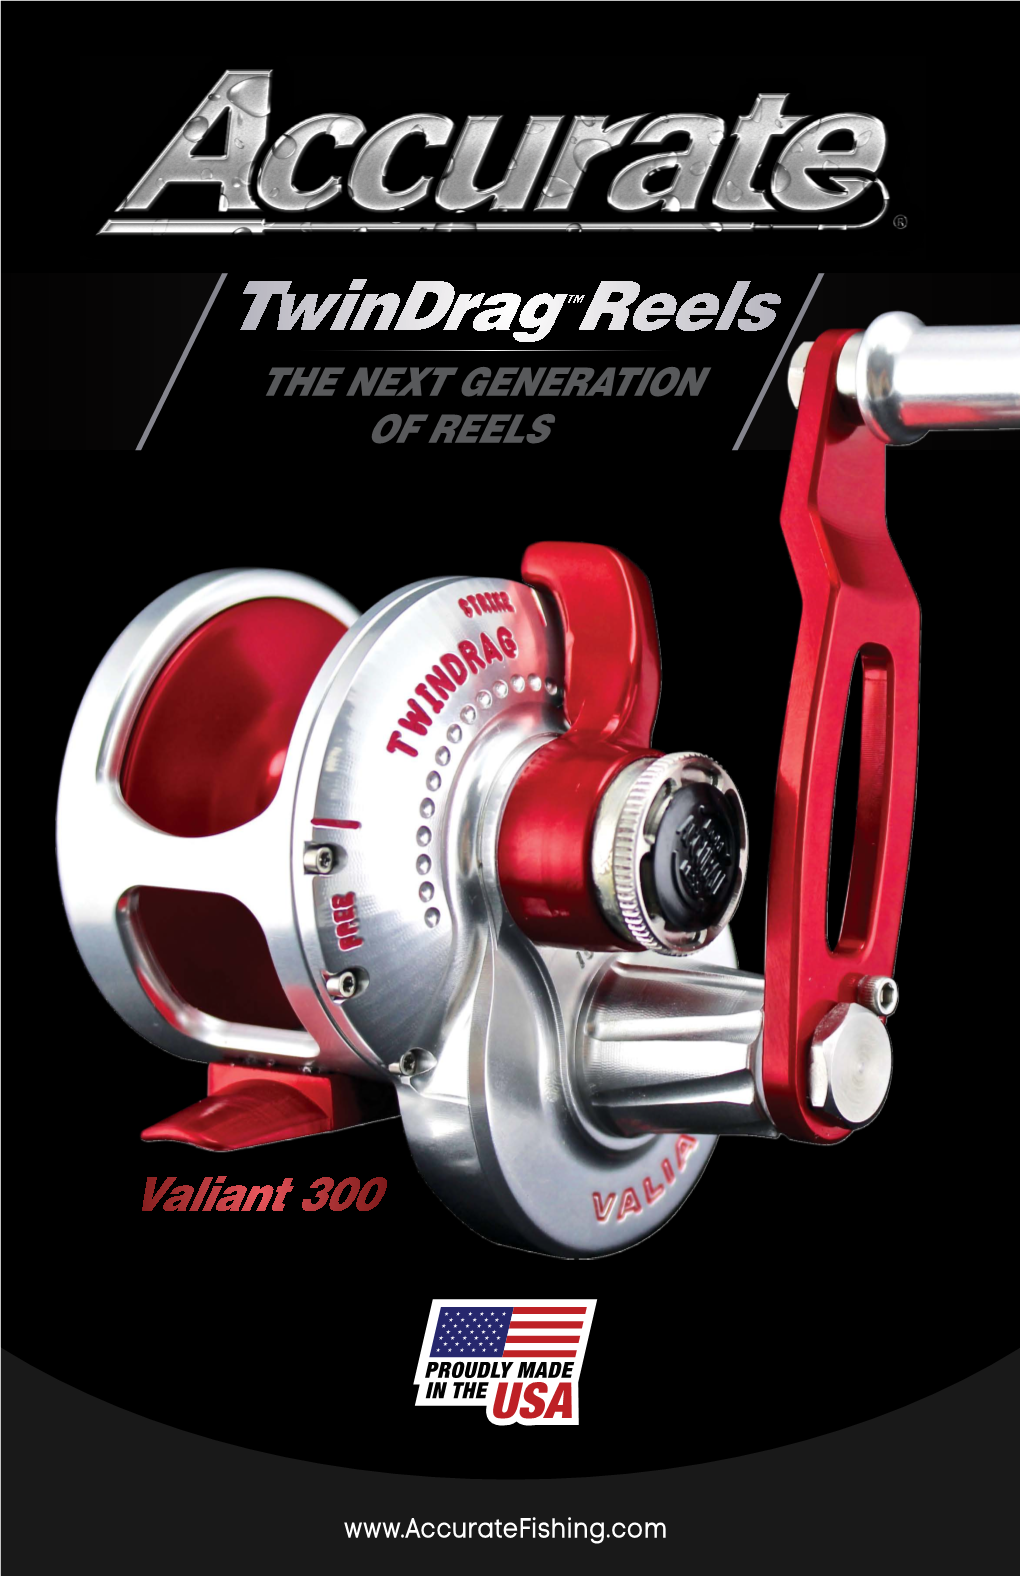 The Next Generation of Reels